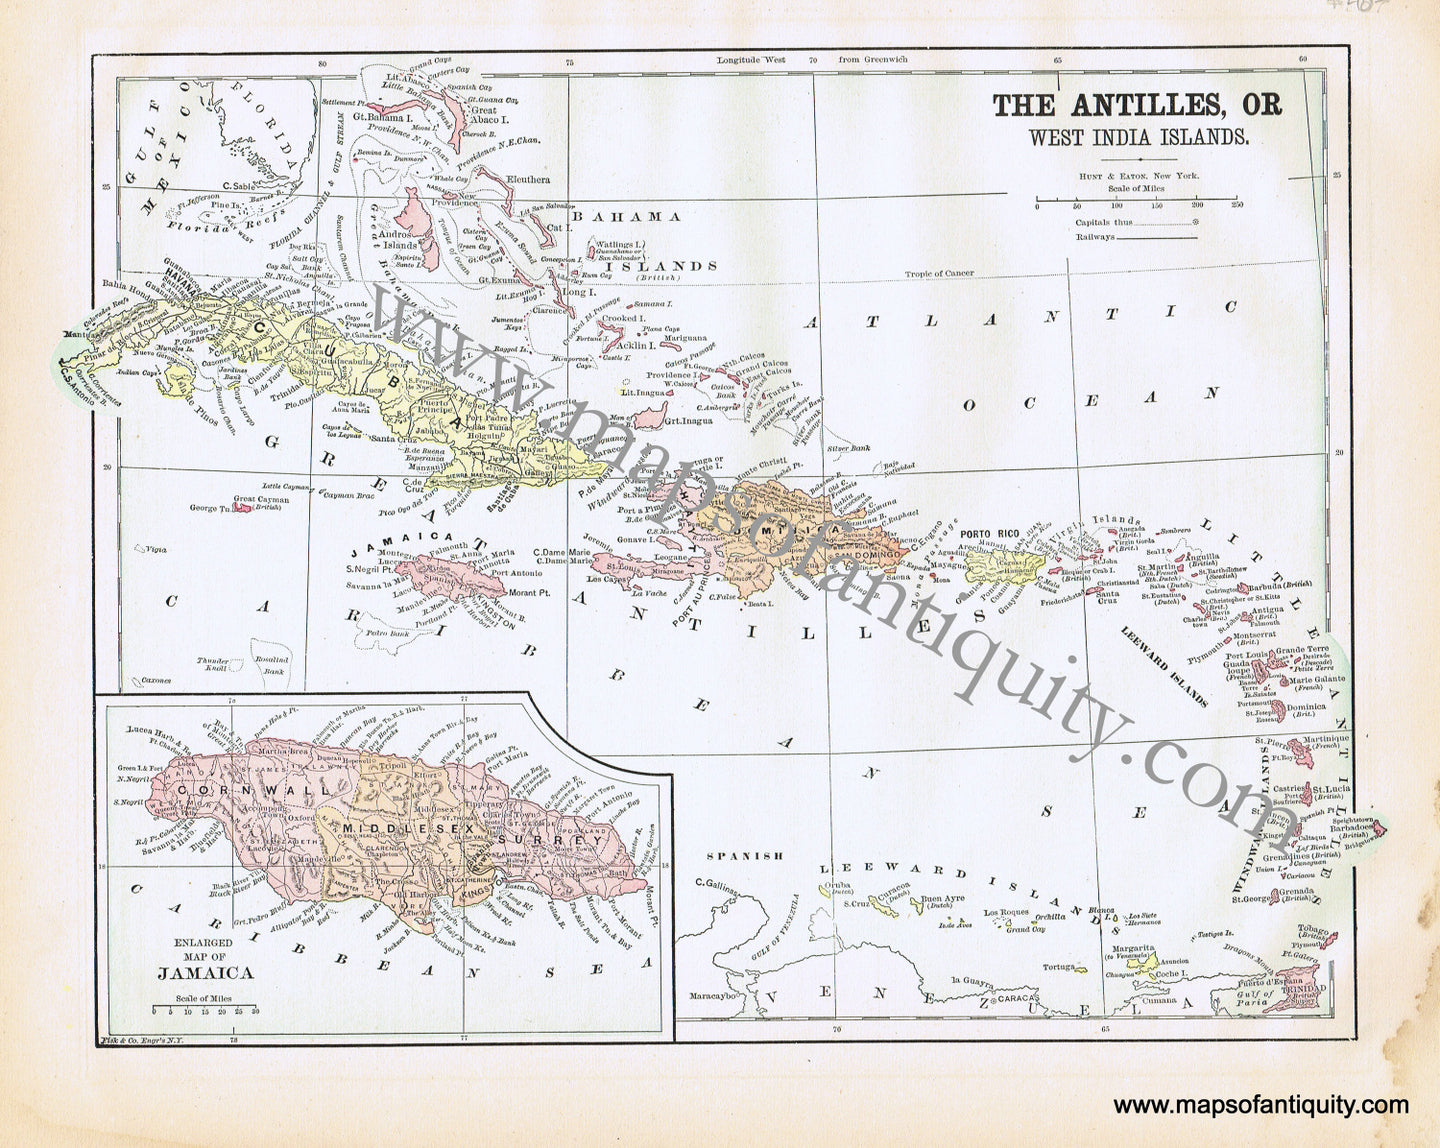 Antique-Printed-Color-Map-The-Antilles-or-West-India-Islands-******-Caribbean--1893-Hunt-&-Eaton-Maps-Of-Antiquity